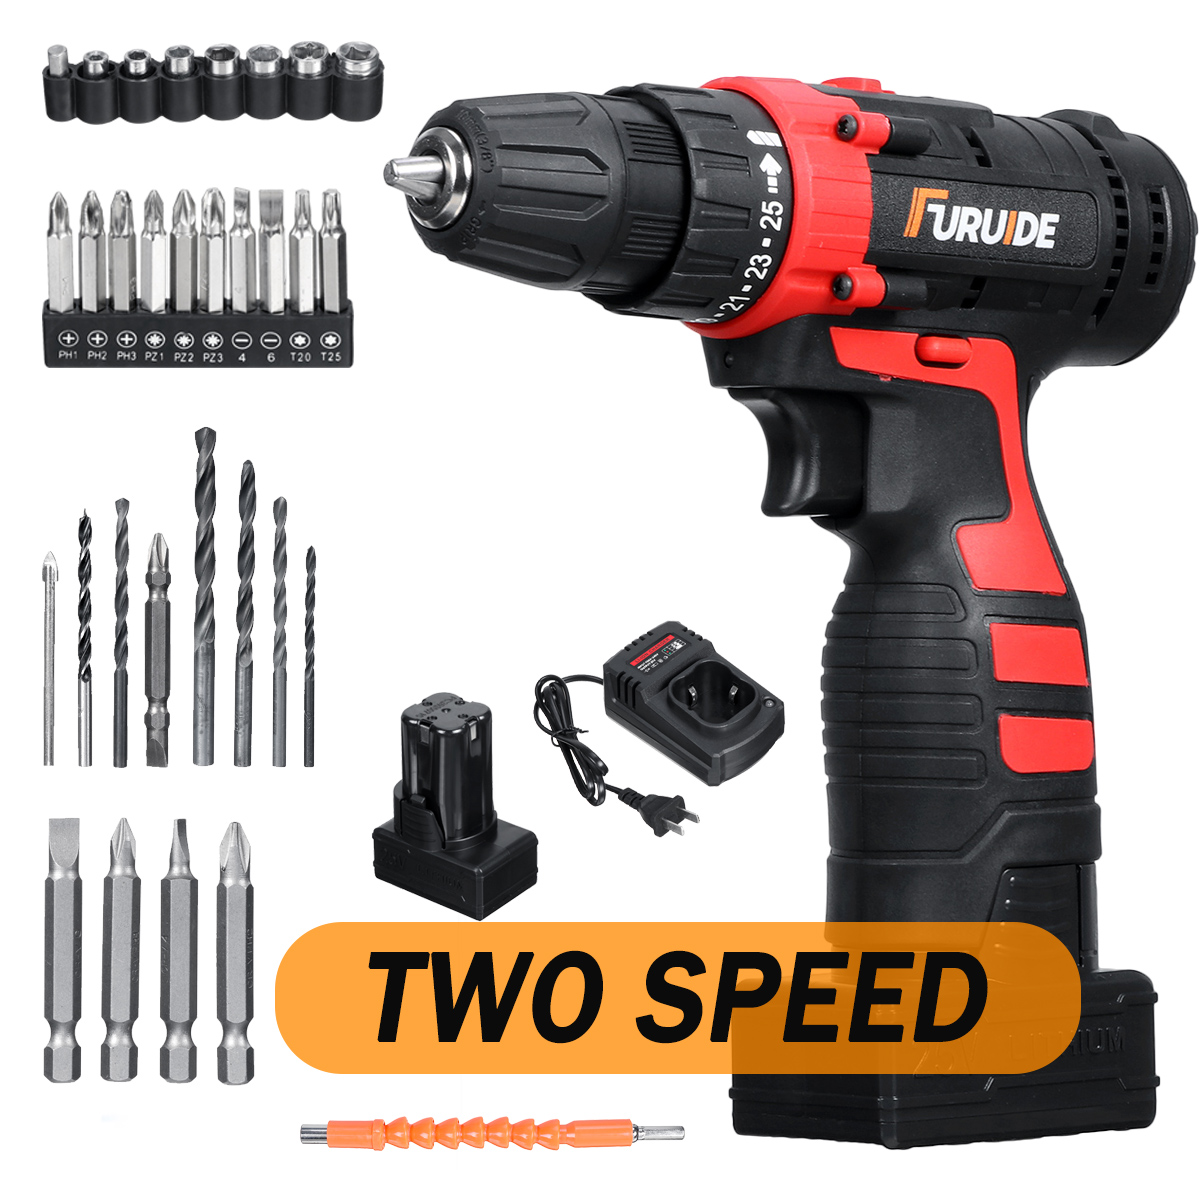 25-V-Drill-2-Speed-Electric-Cordless-Drill-Driver-with-Bits-Set-Batteries-1757270-3